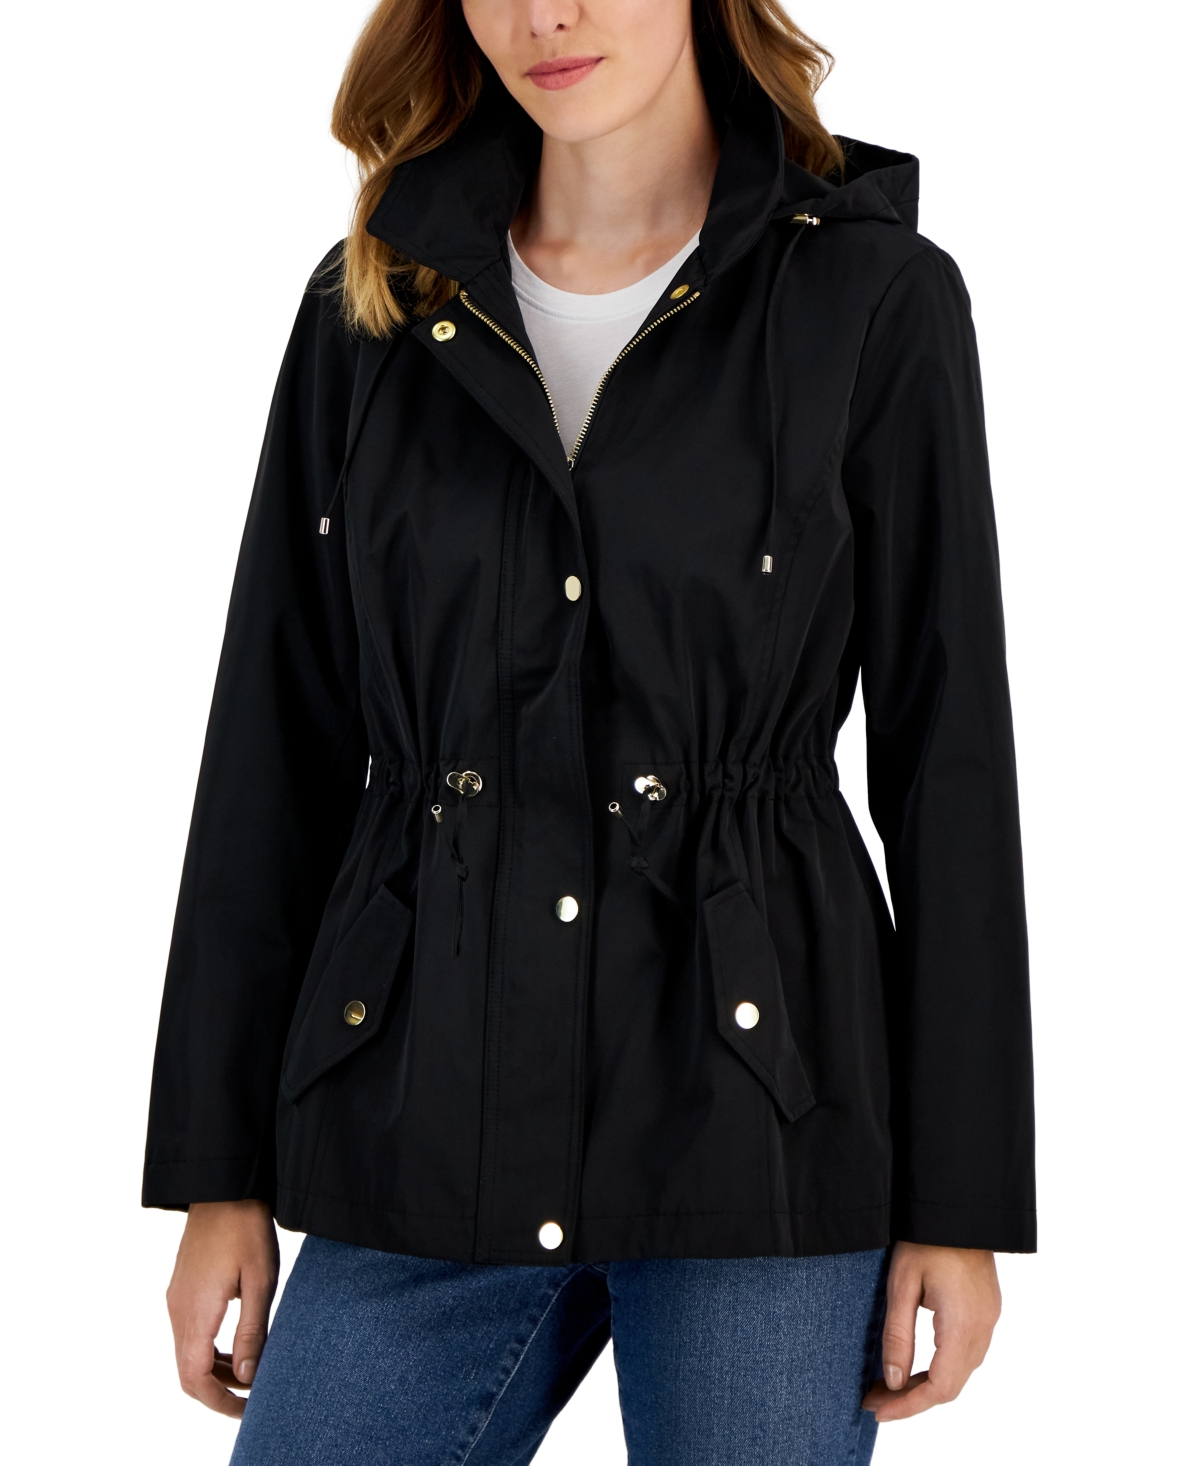 STYLE & CO PETITE ANORAK HOODED JACKET, CREATED FOR MACY'S